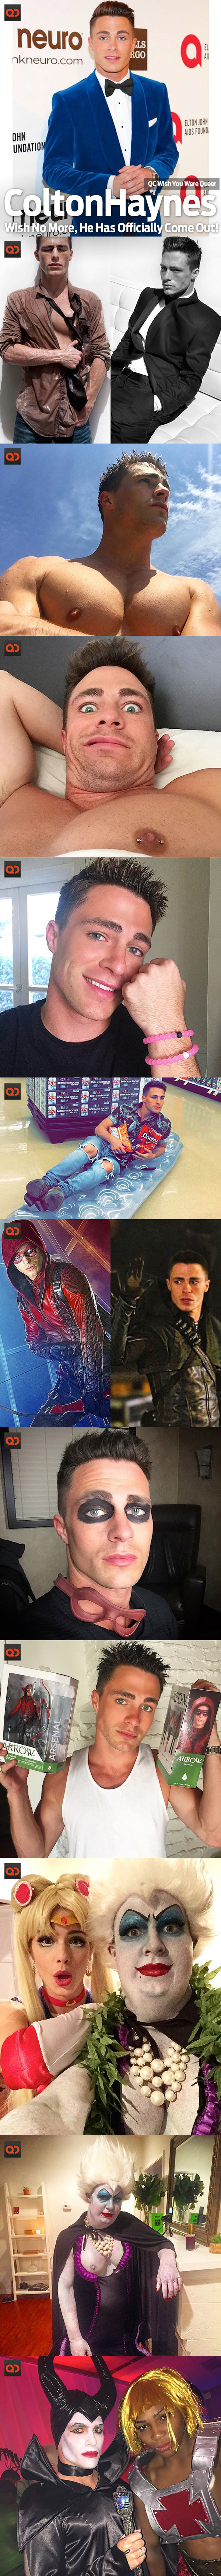 qc-wywq-colton_haynes_comes_out-collage01